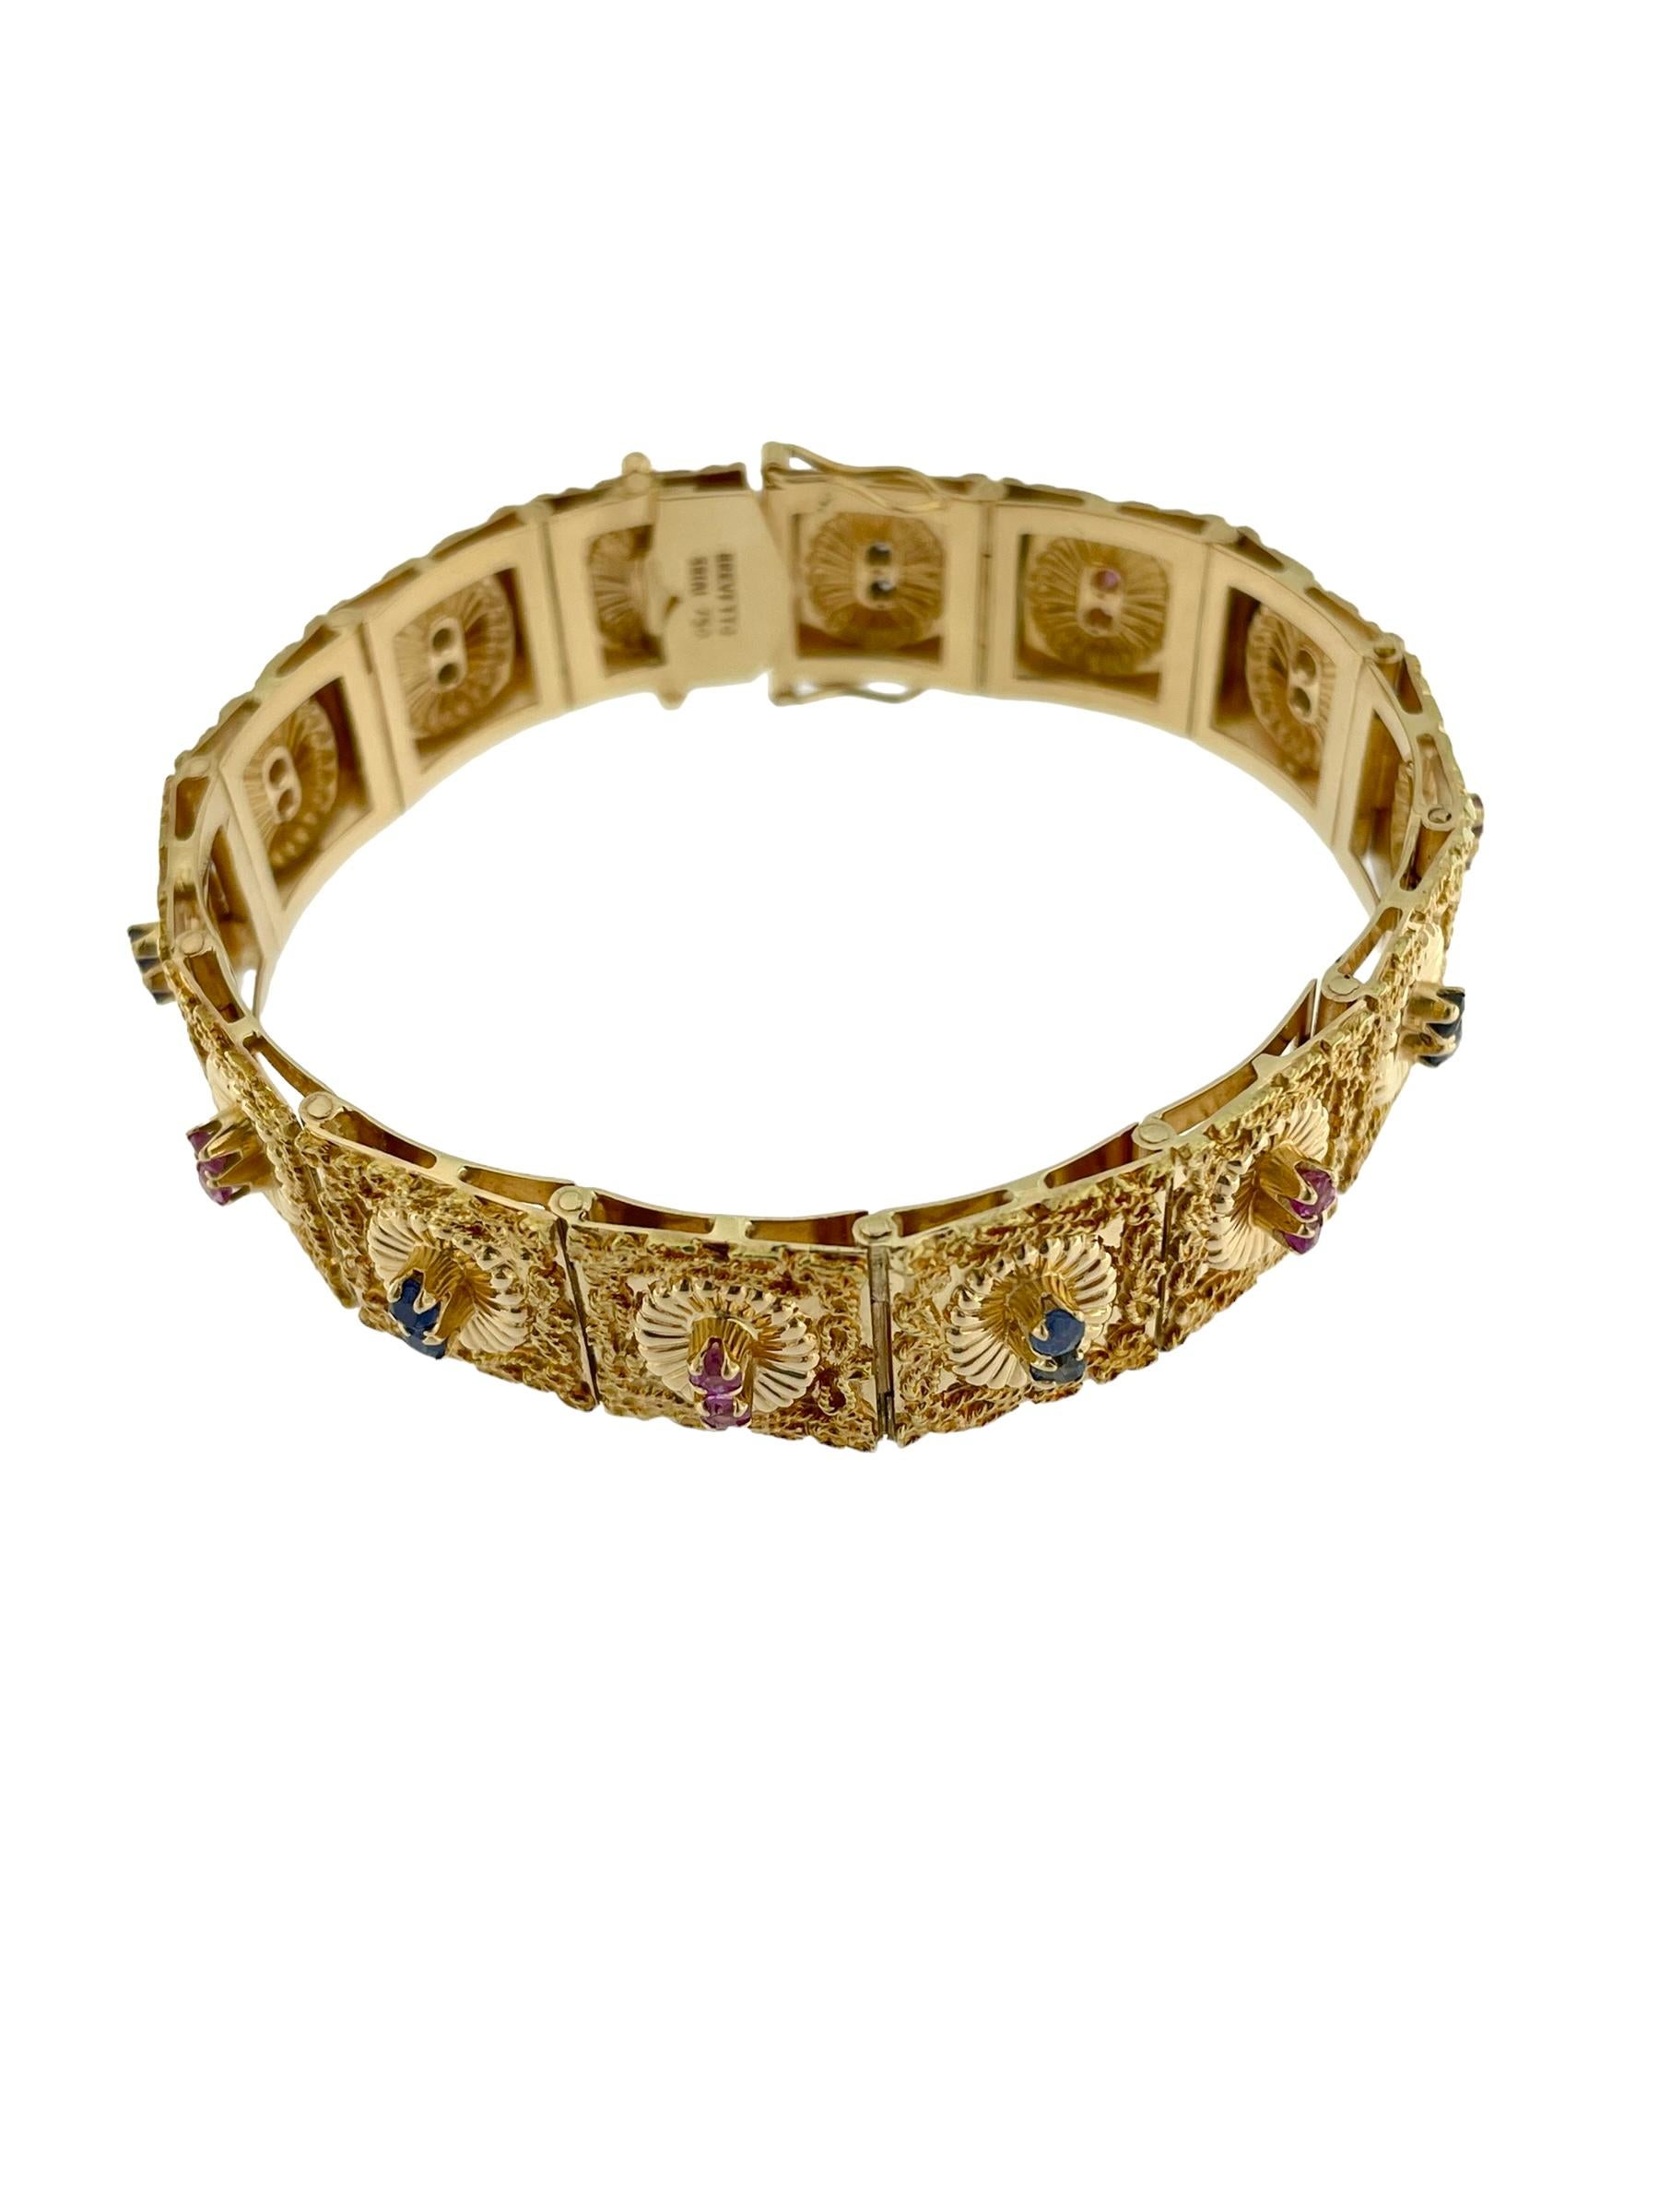 Retro Bracelet by Brevetto Yellow Gold Rubies and Sapphires For Sale 2